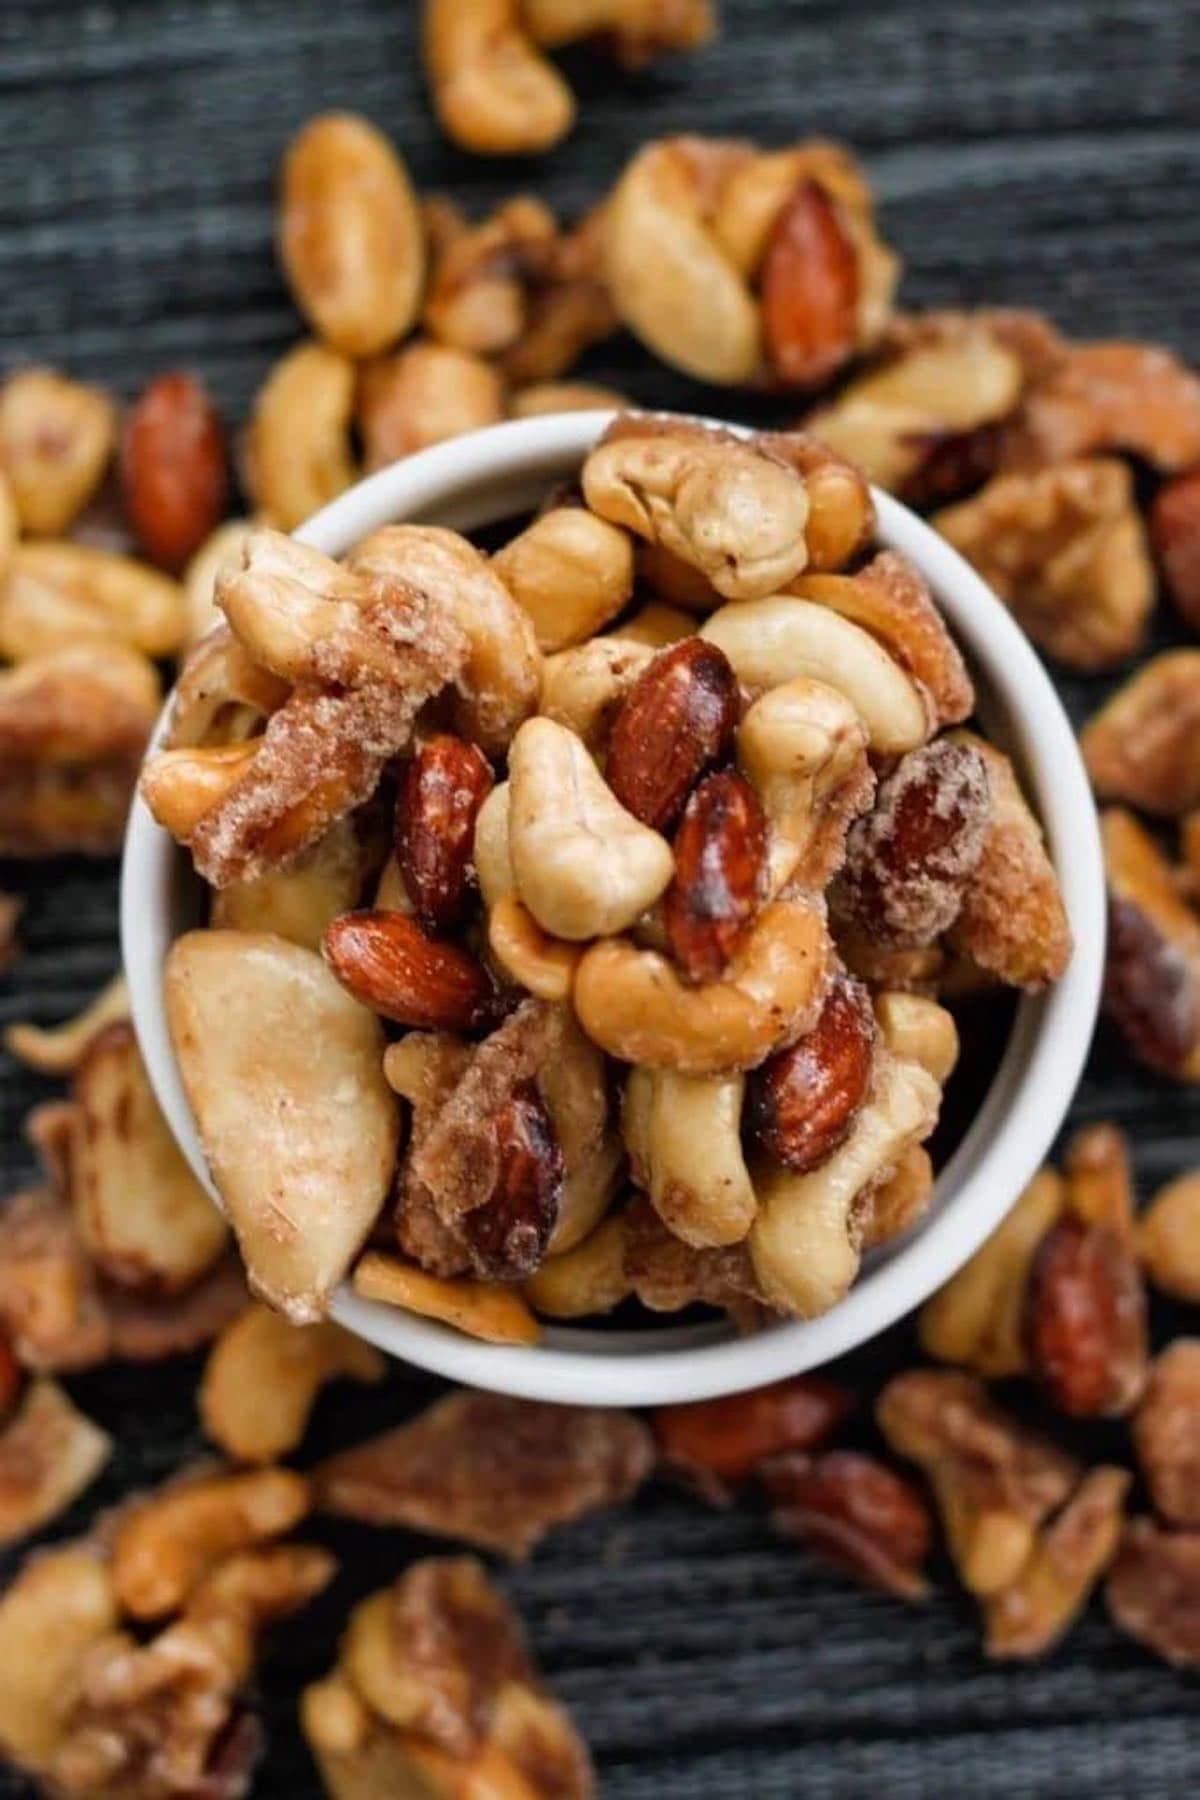 caramelized nuts.